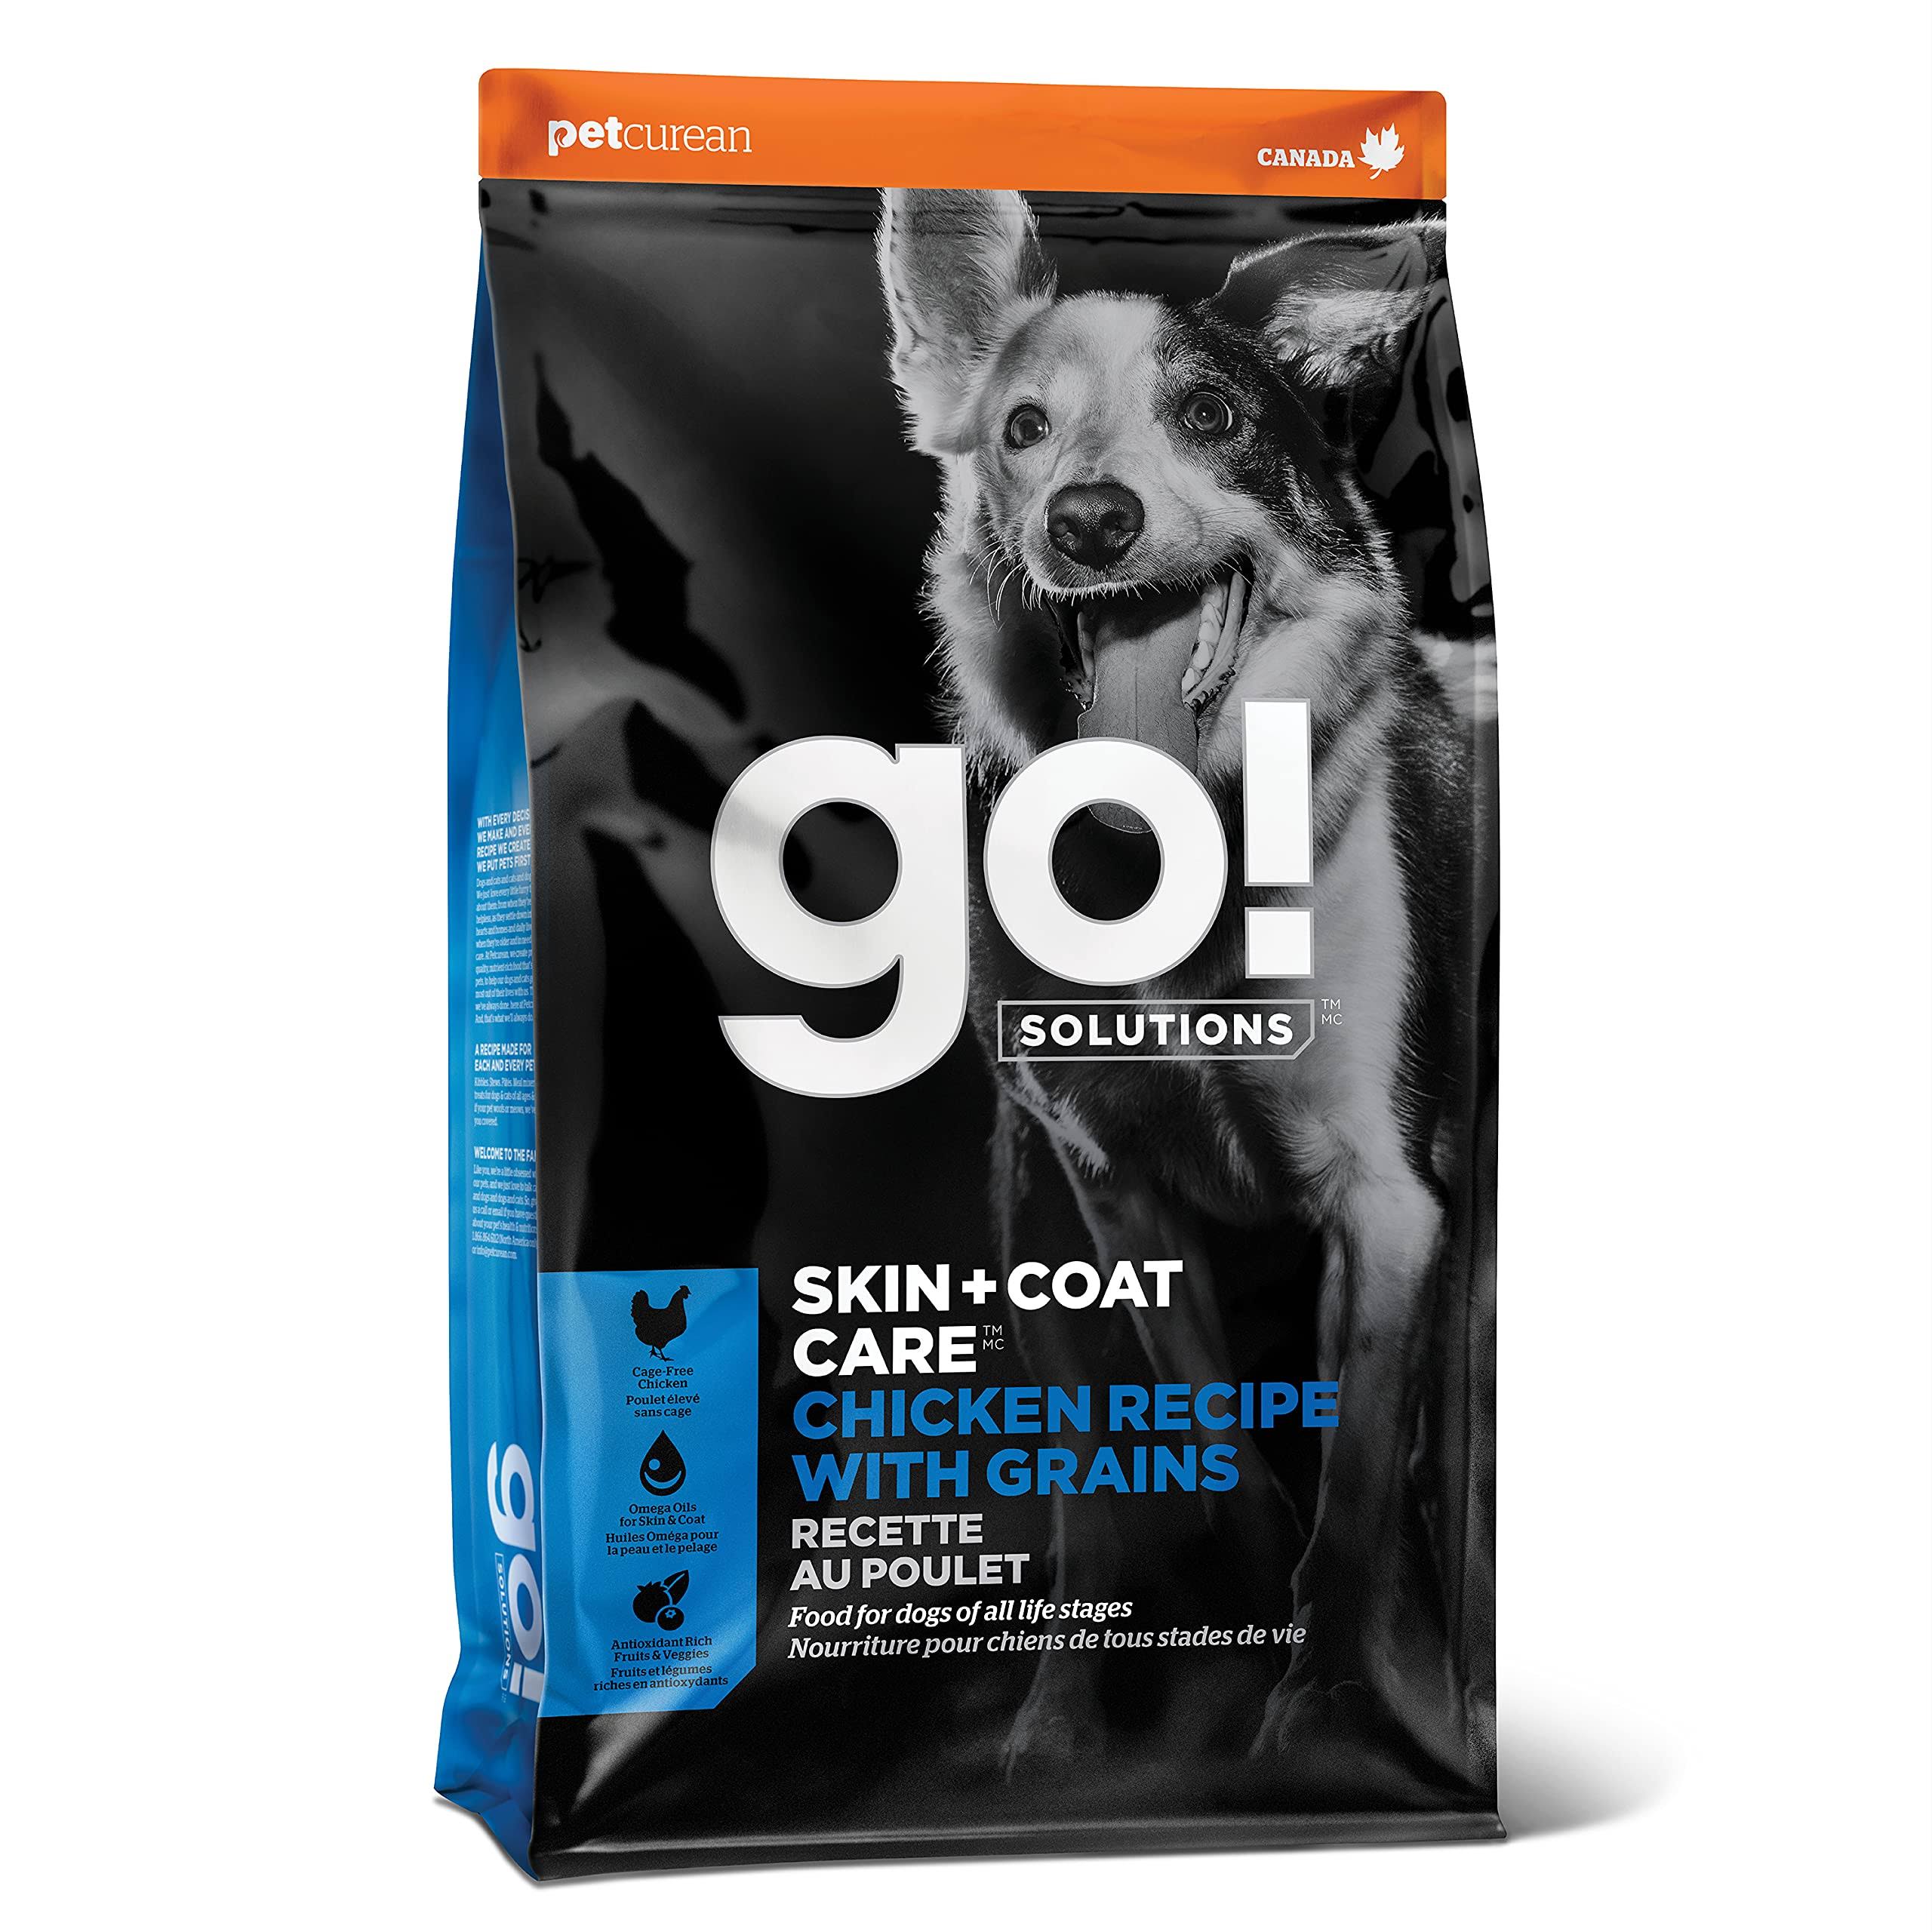 Go! Solutions Skin + Coat Care Chicken Recipe Dry Dog Food, 3.5 Pounds